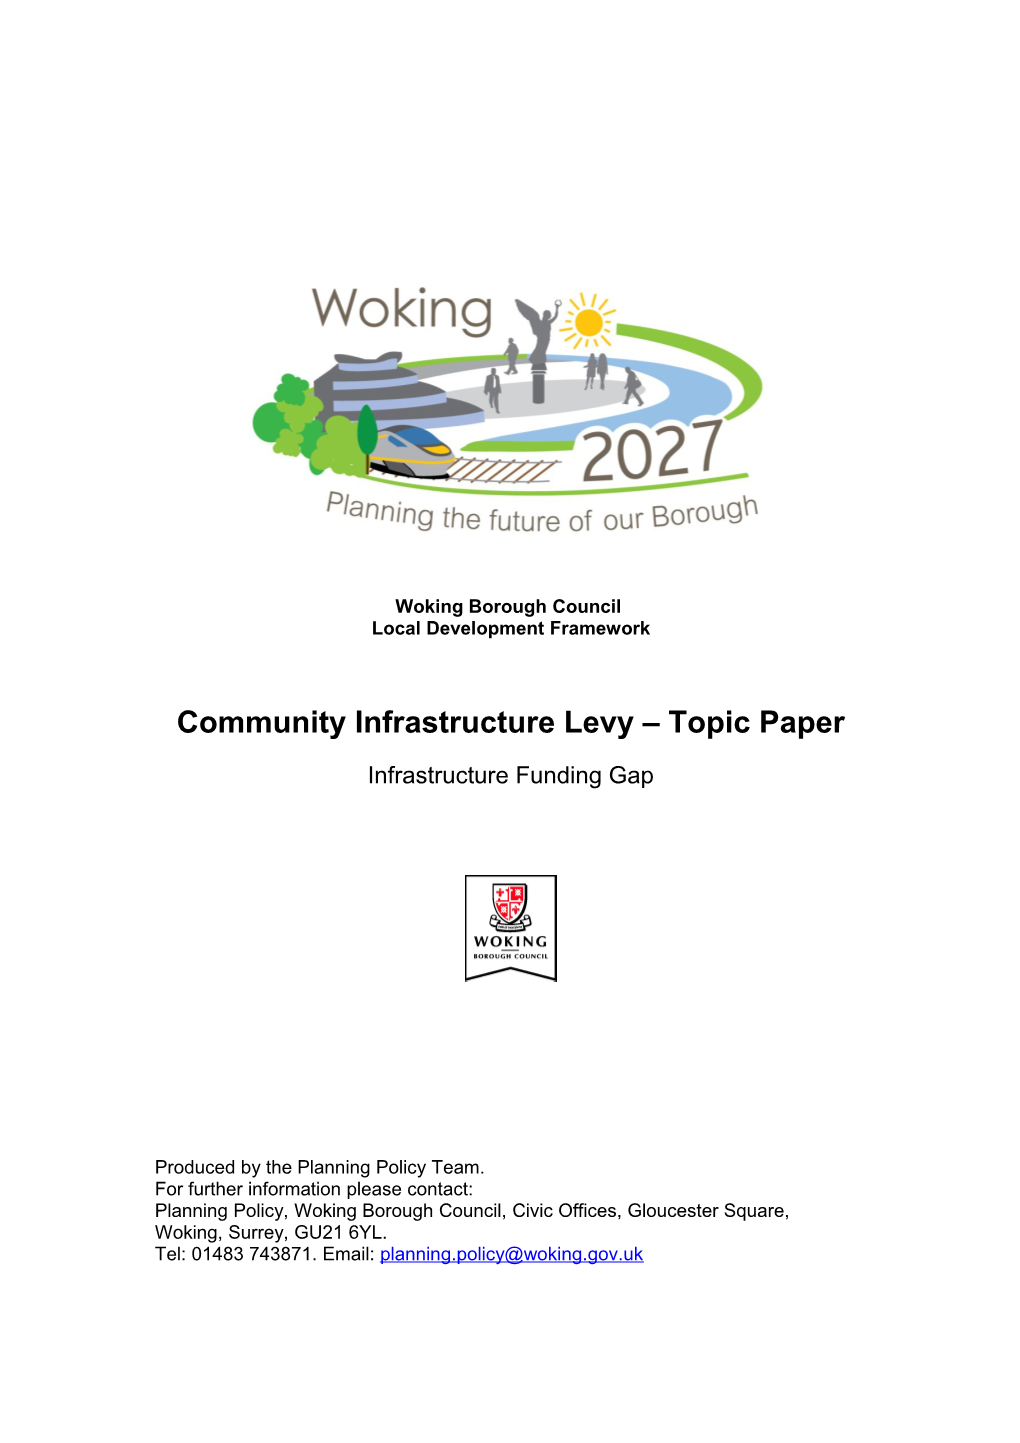 Community Infrastructure Levy Topic Paper